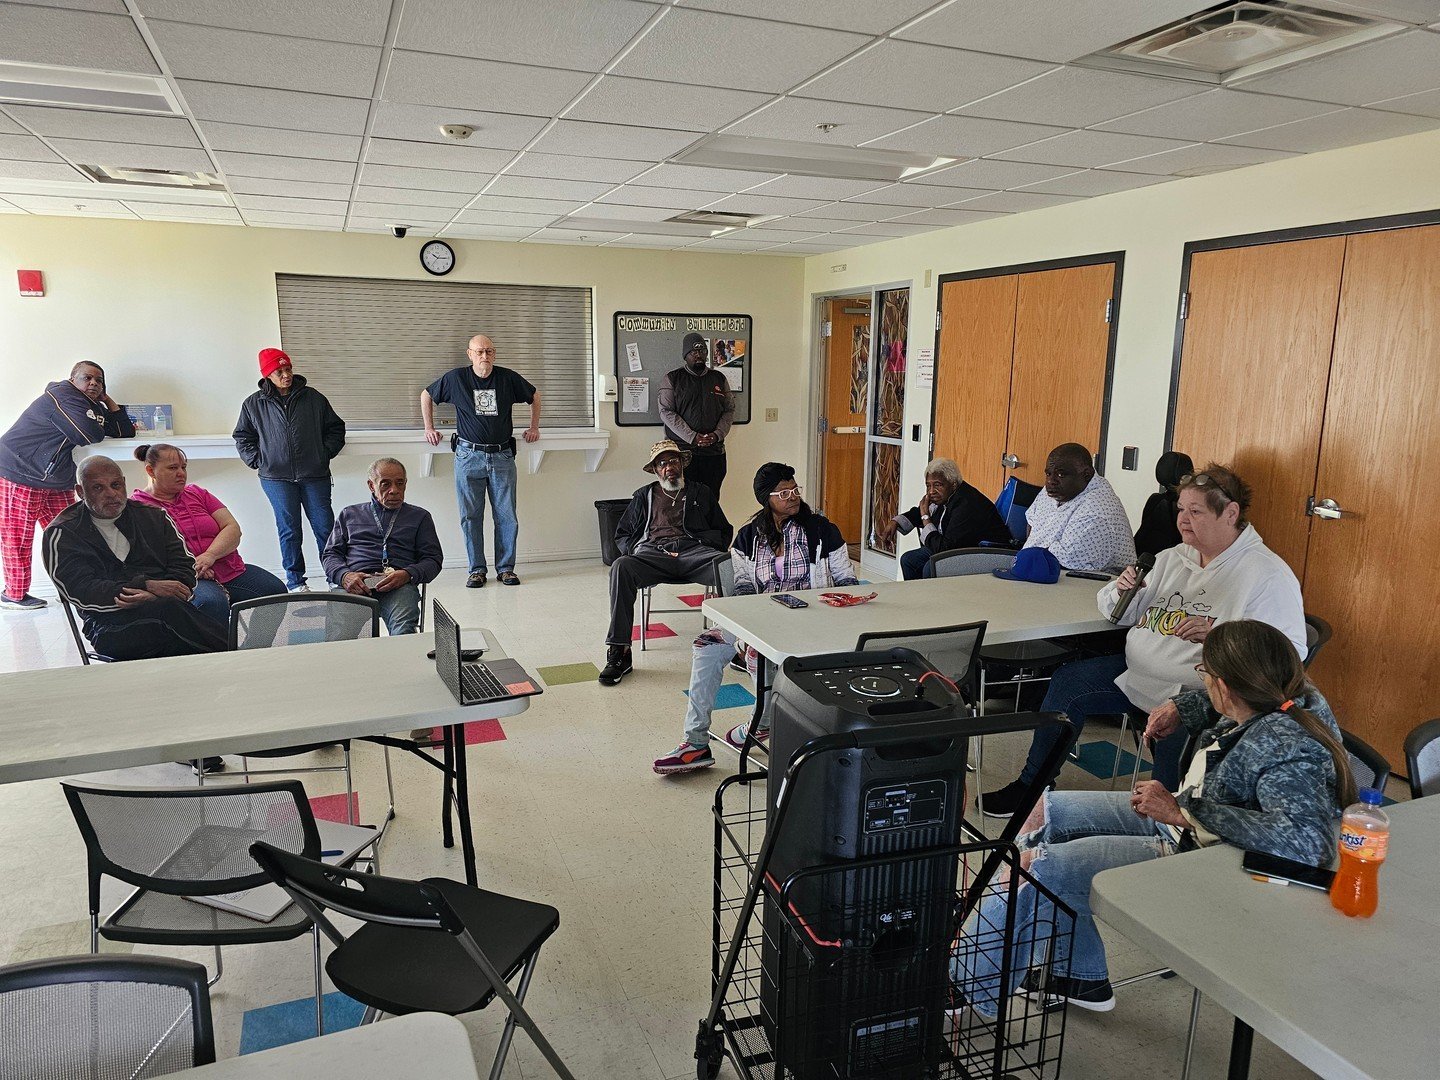 Saferstein tenants had a great initial meeting with AMHA today. We were able to put a plan together to get their needs addressed and develop their leadership.  The next meeting is May 8th from 9 to 11 am. Tenants will be cooking food for us to eat af